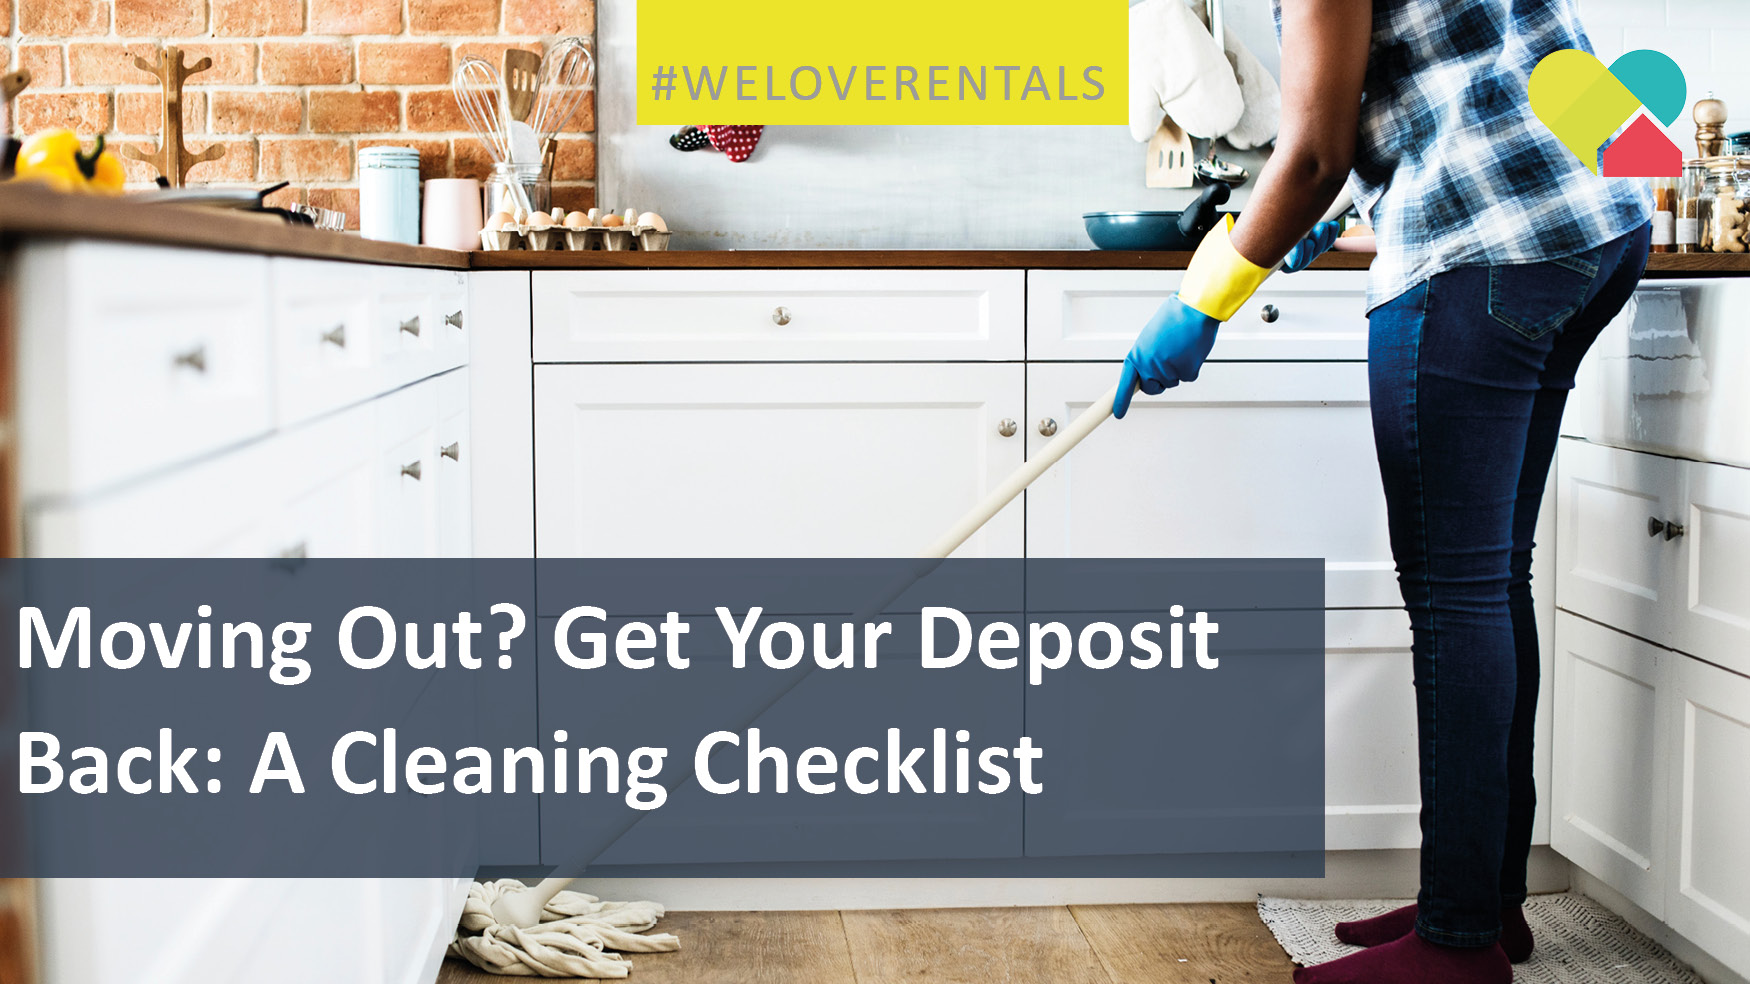 Get Your Deposit Back: A Cleaning Checklist